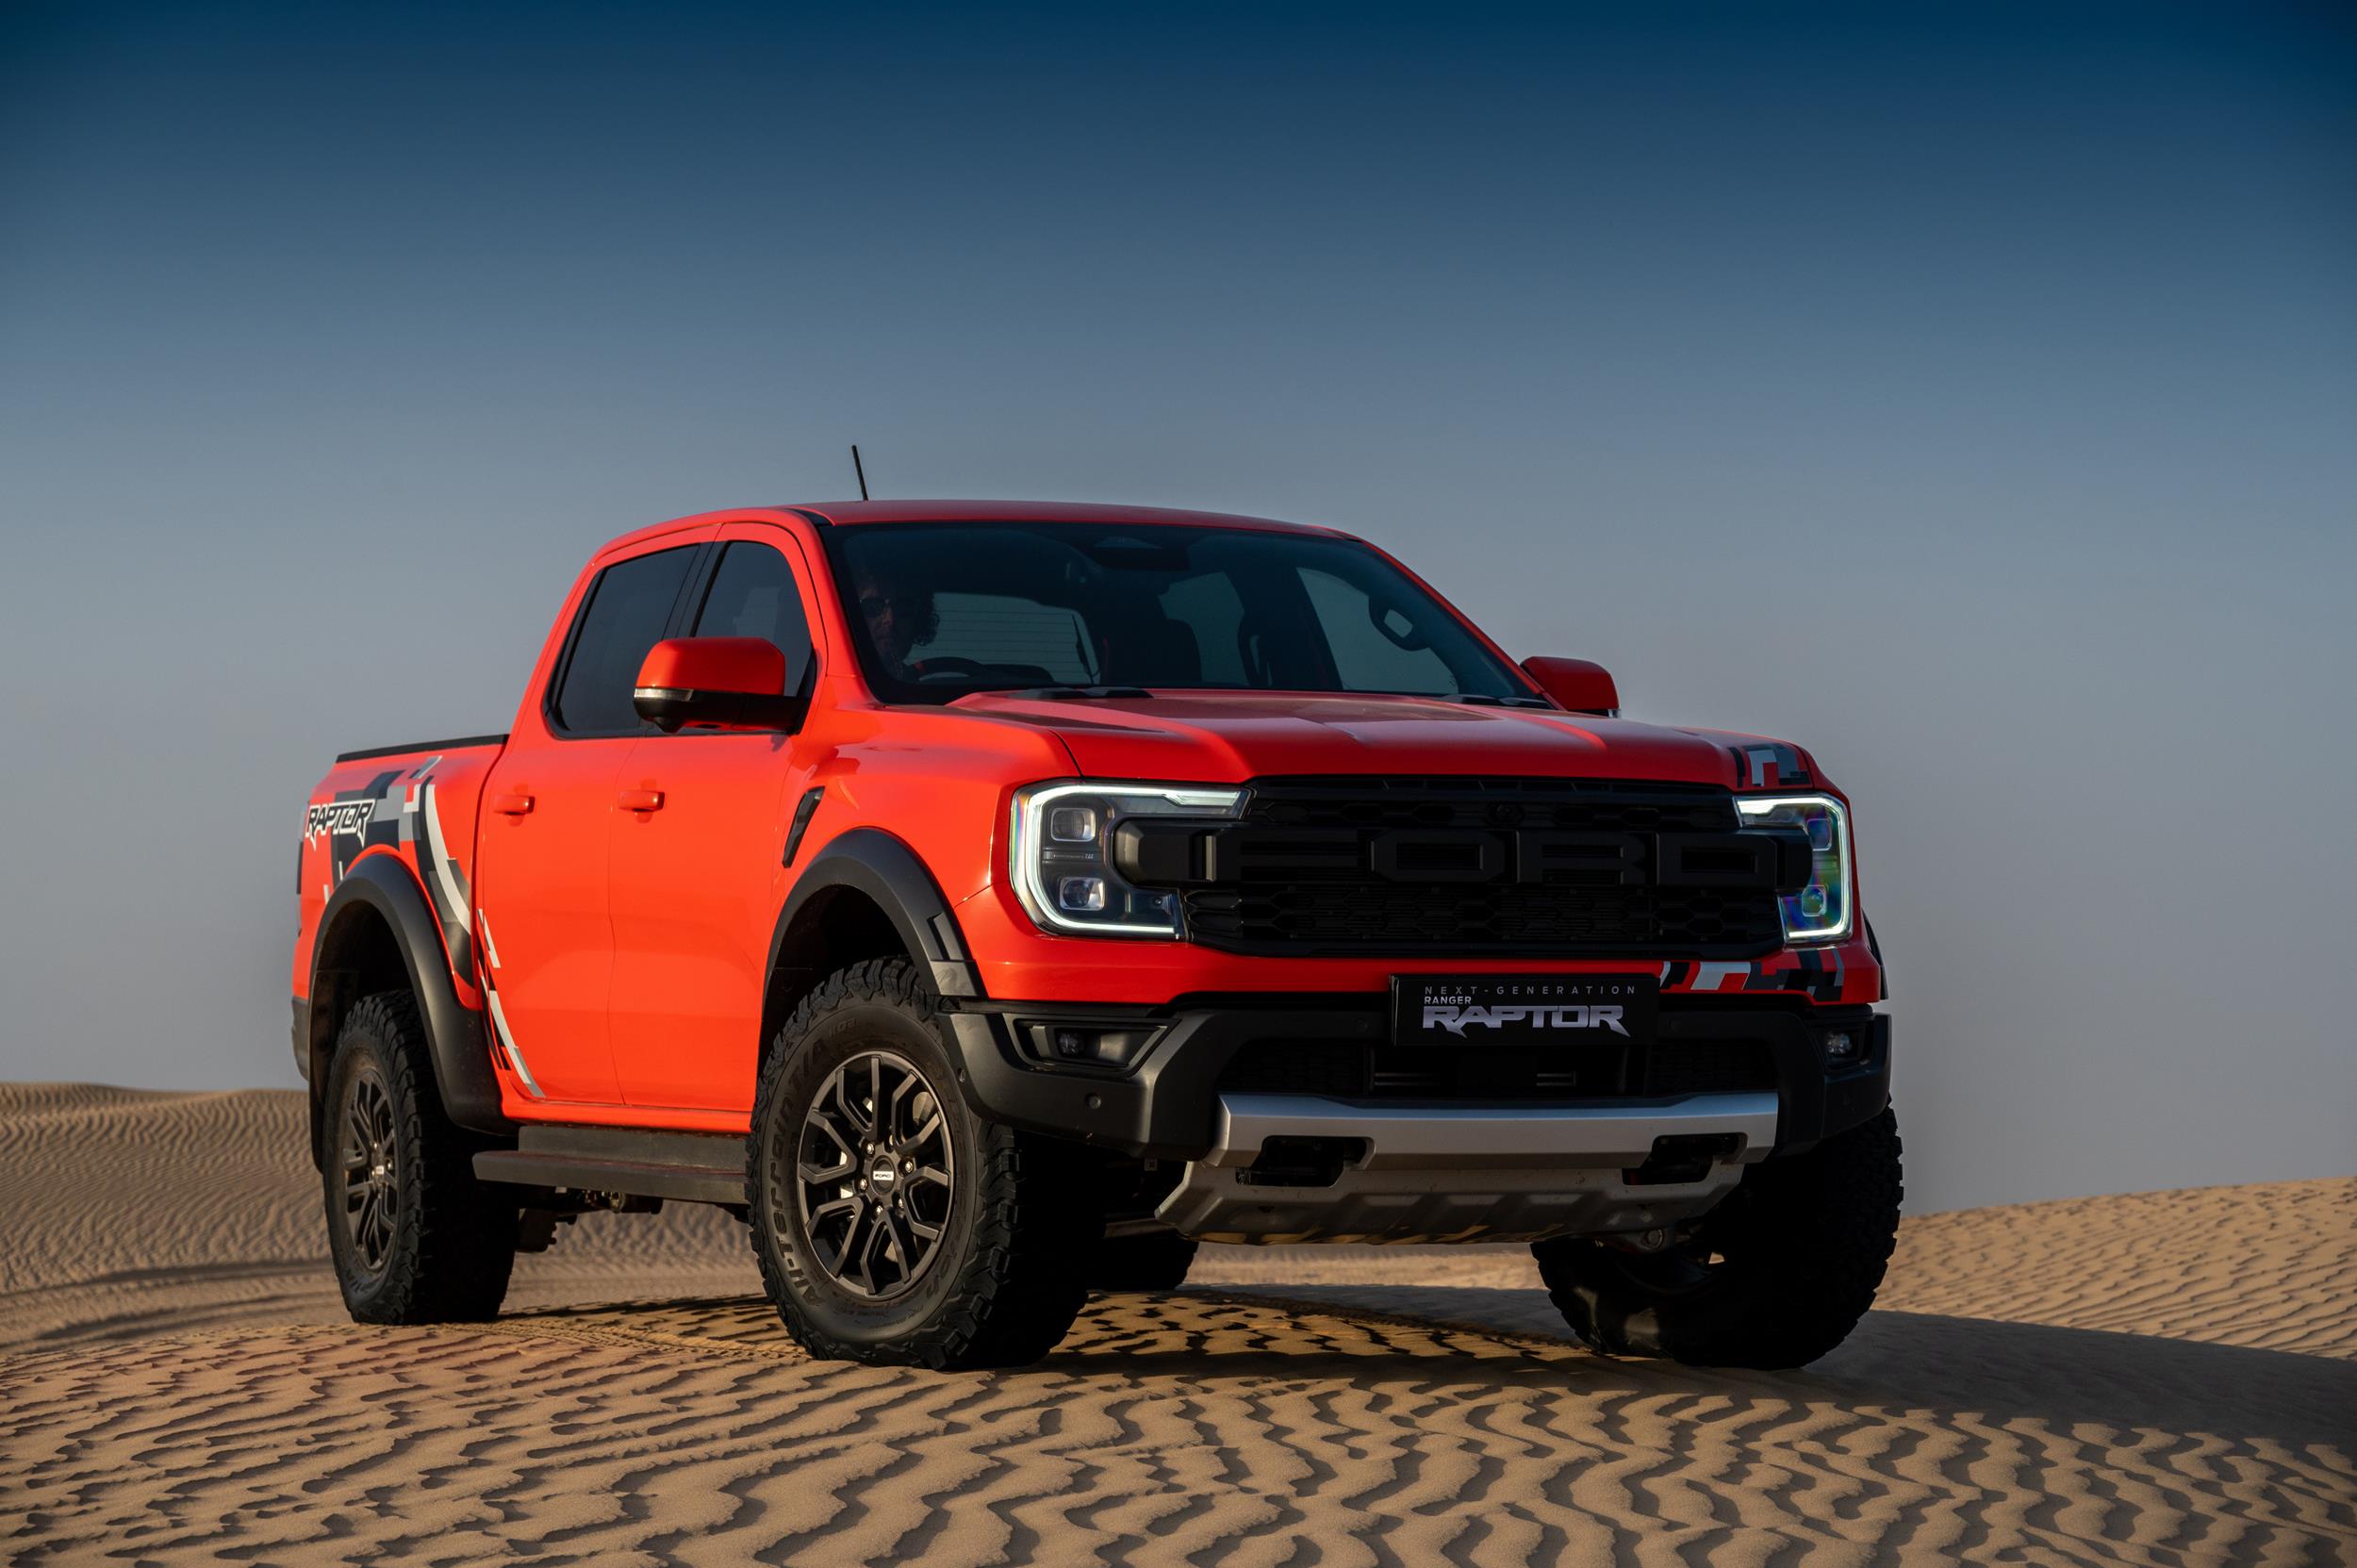 Coming to America: The All-New 2024 Ford Ranger Raptor is Ready to Dominate  in the Dirt